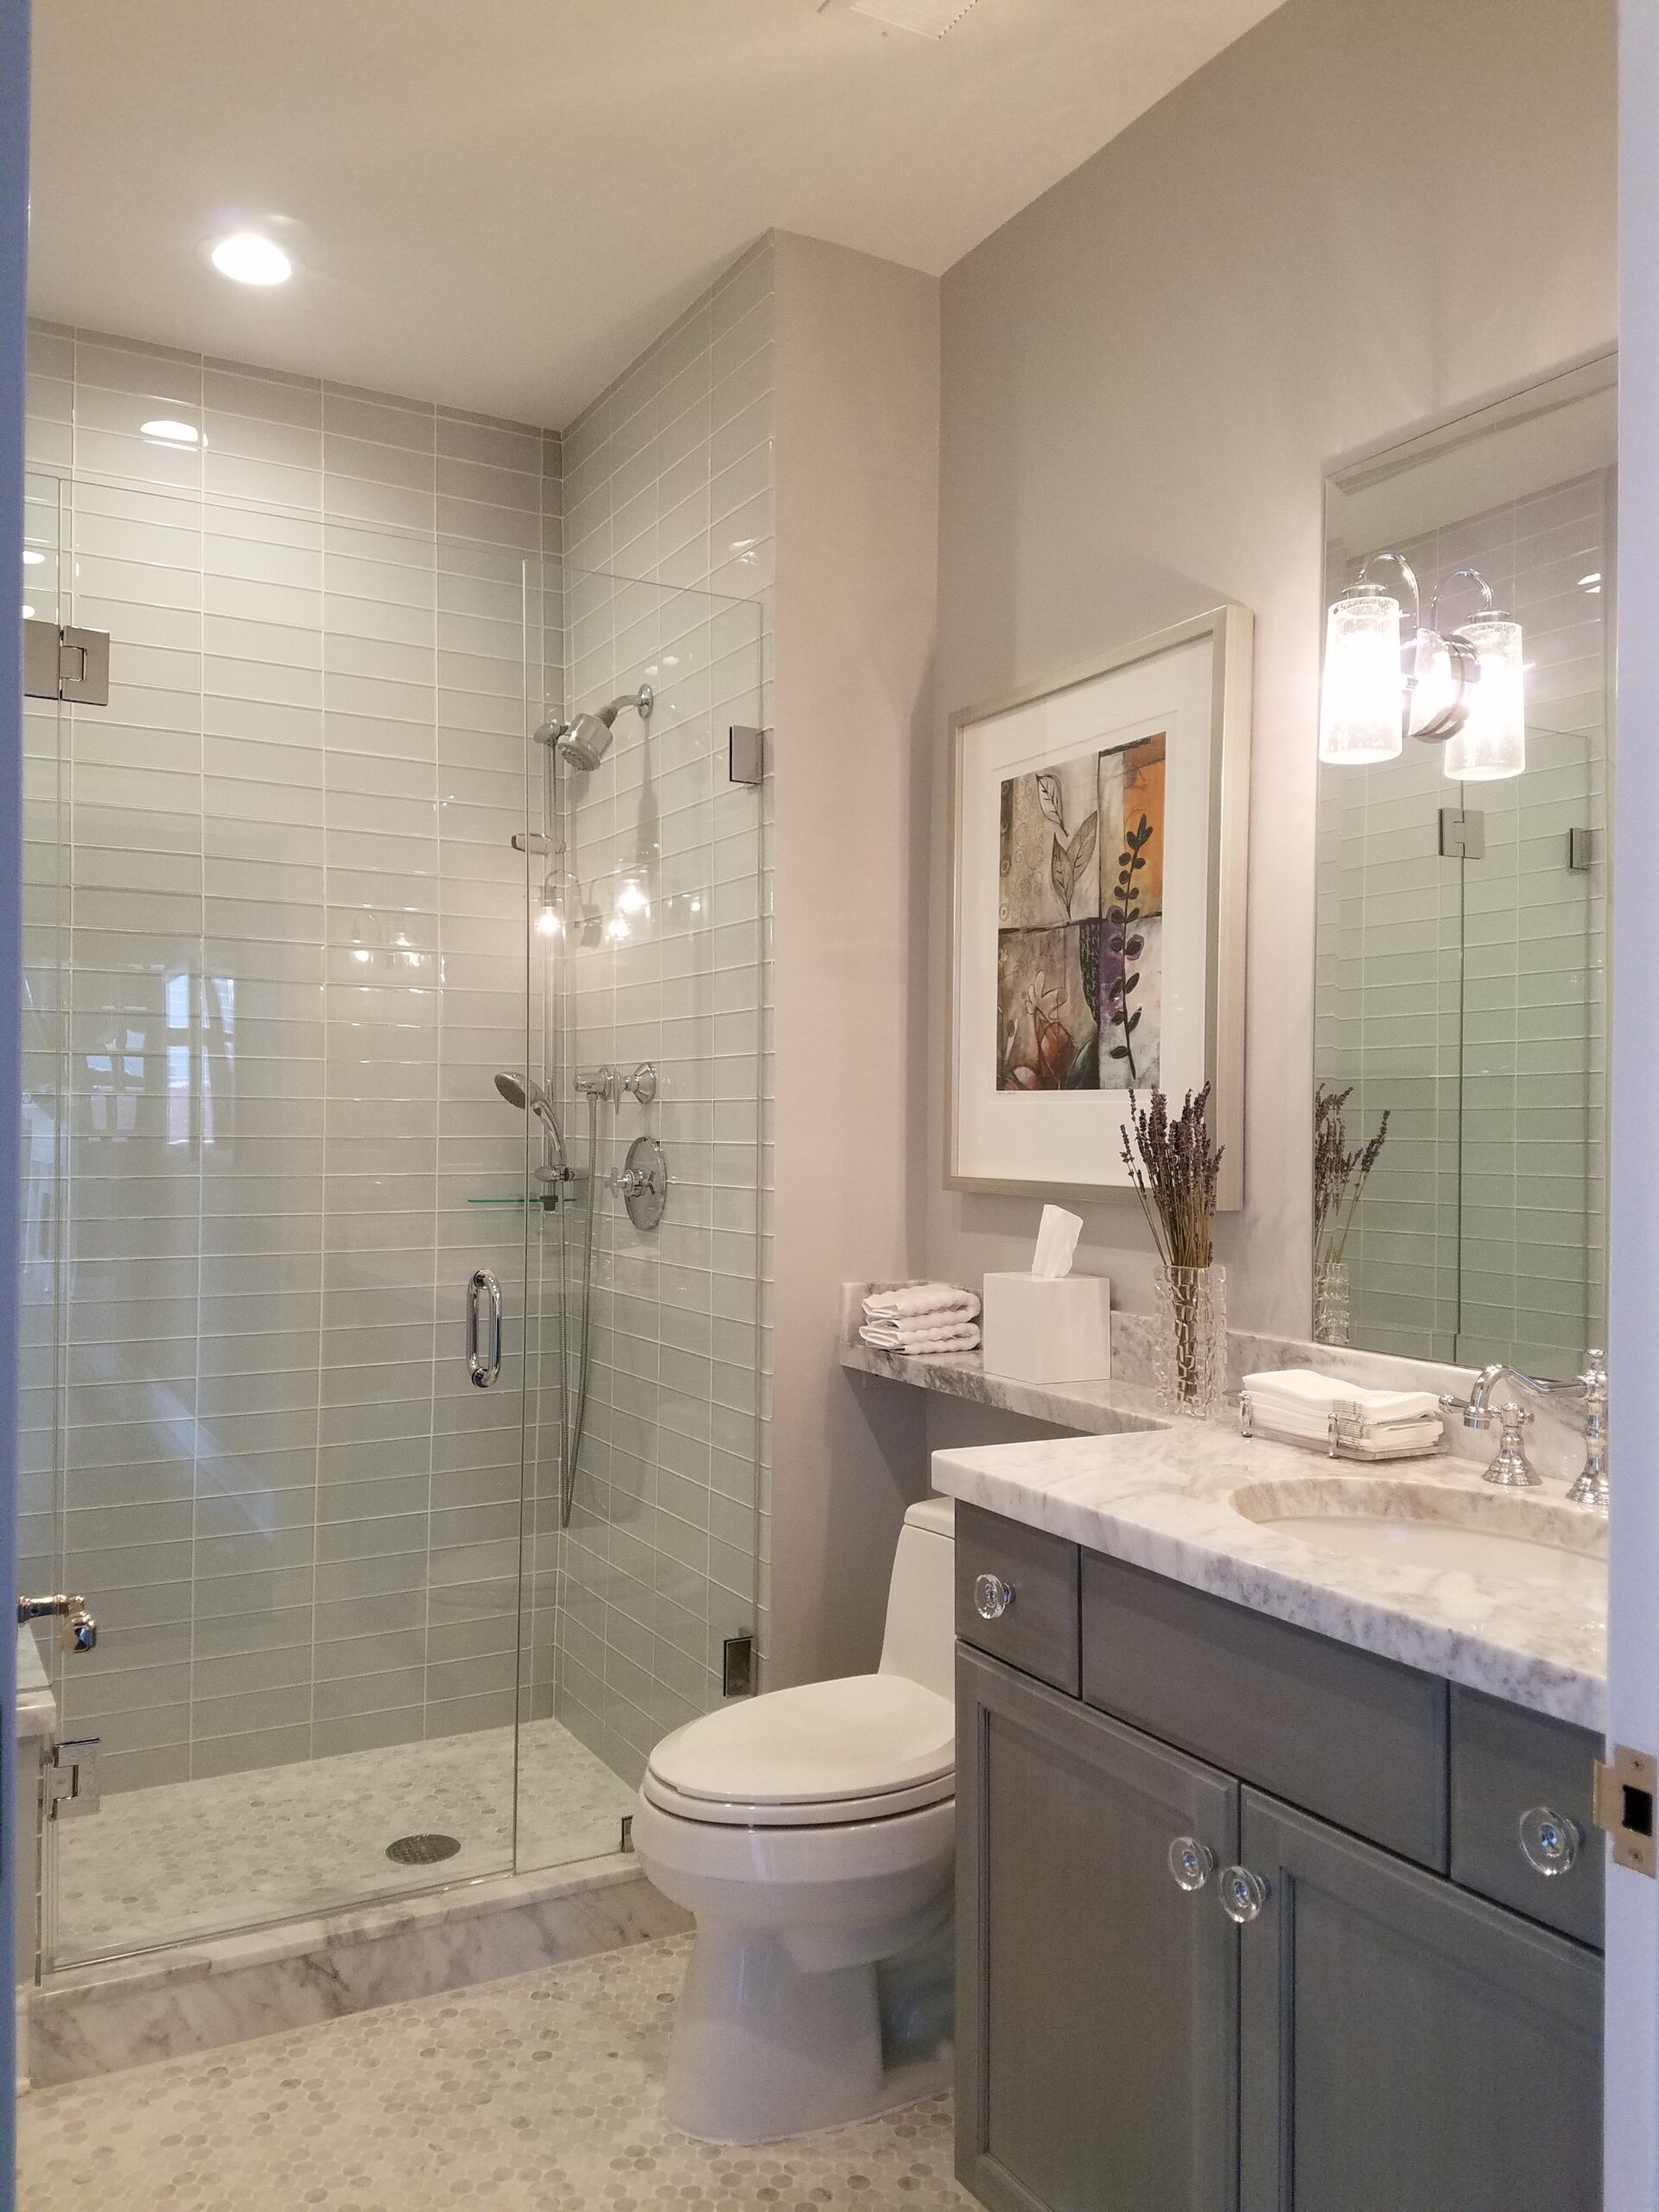 A bathroom remodel in Chicago with a beautiful glass walk-in shower and white tilework